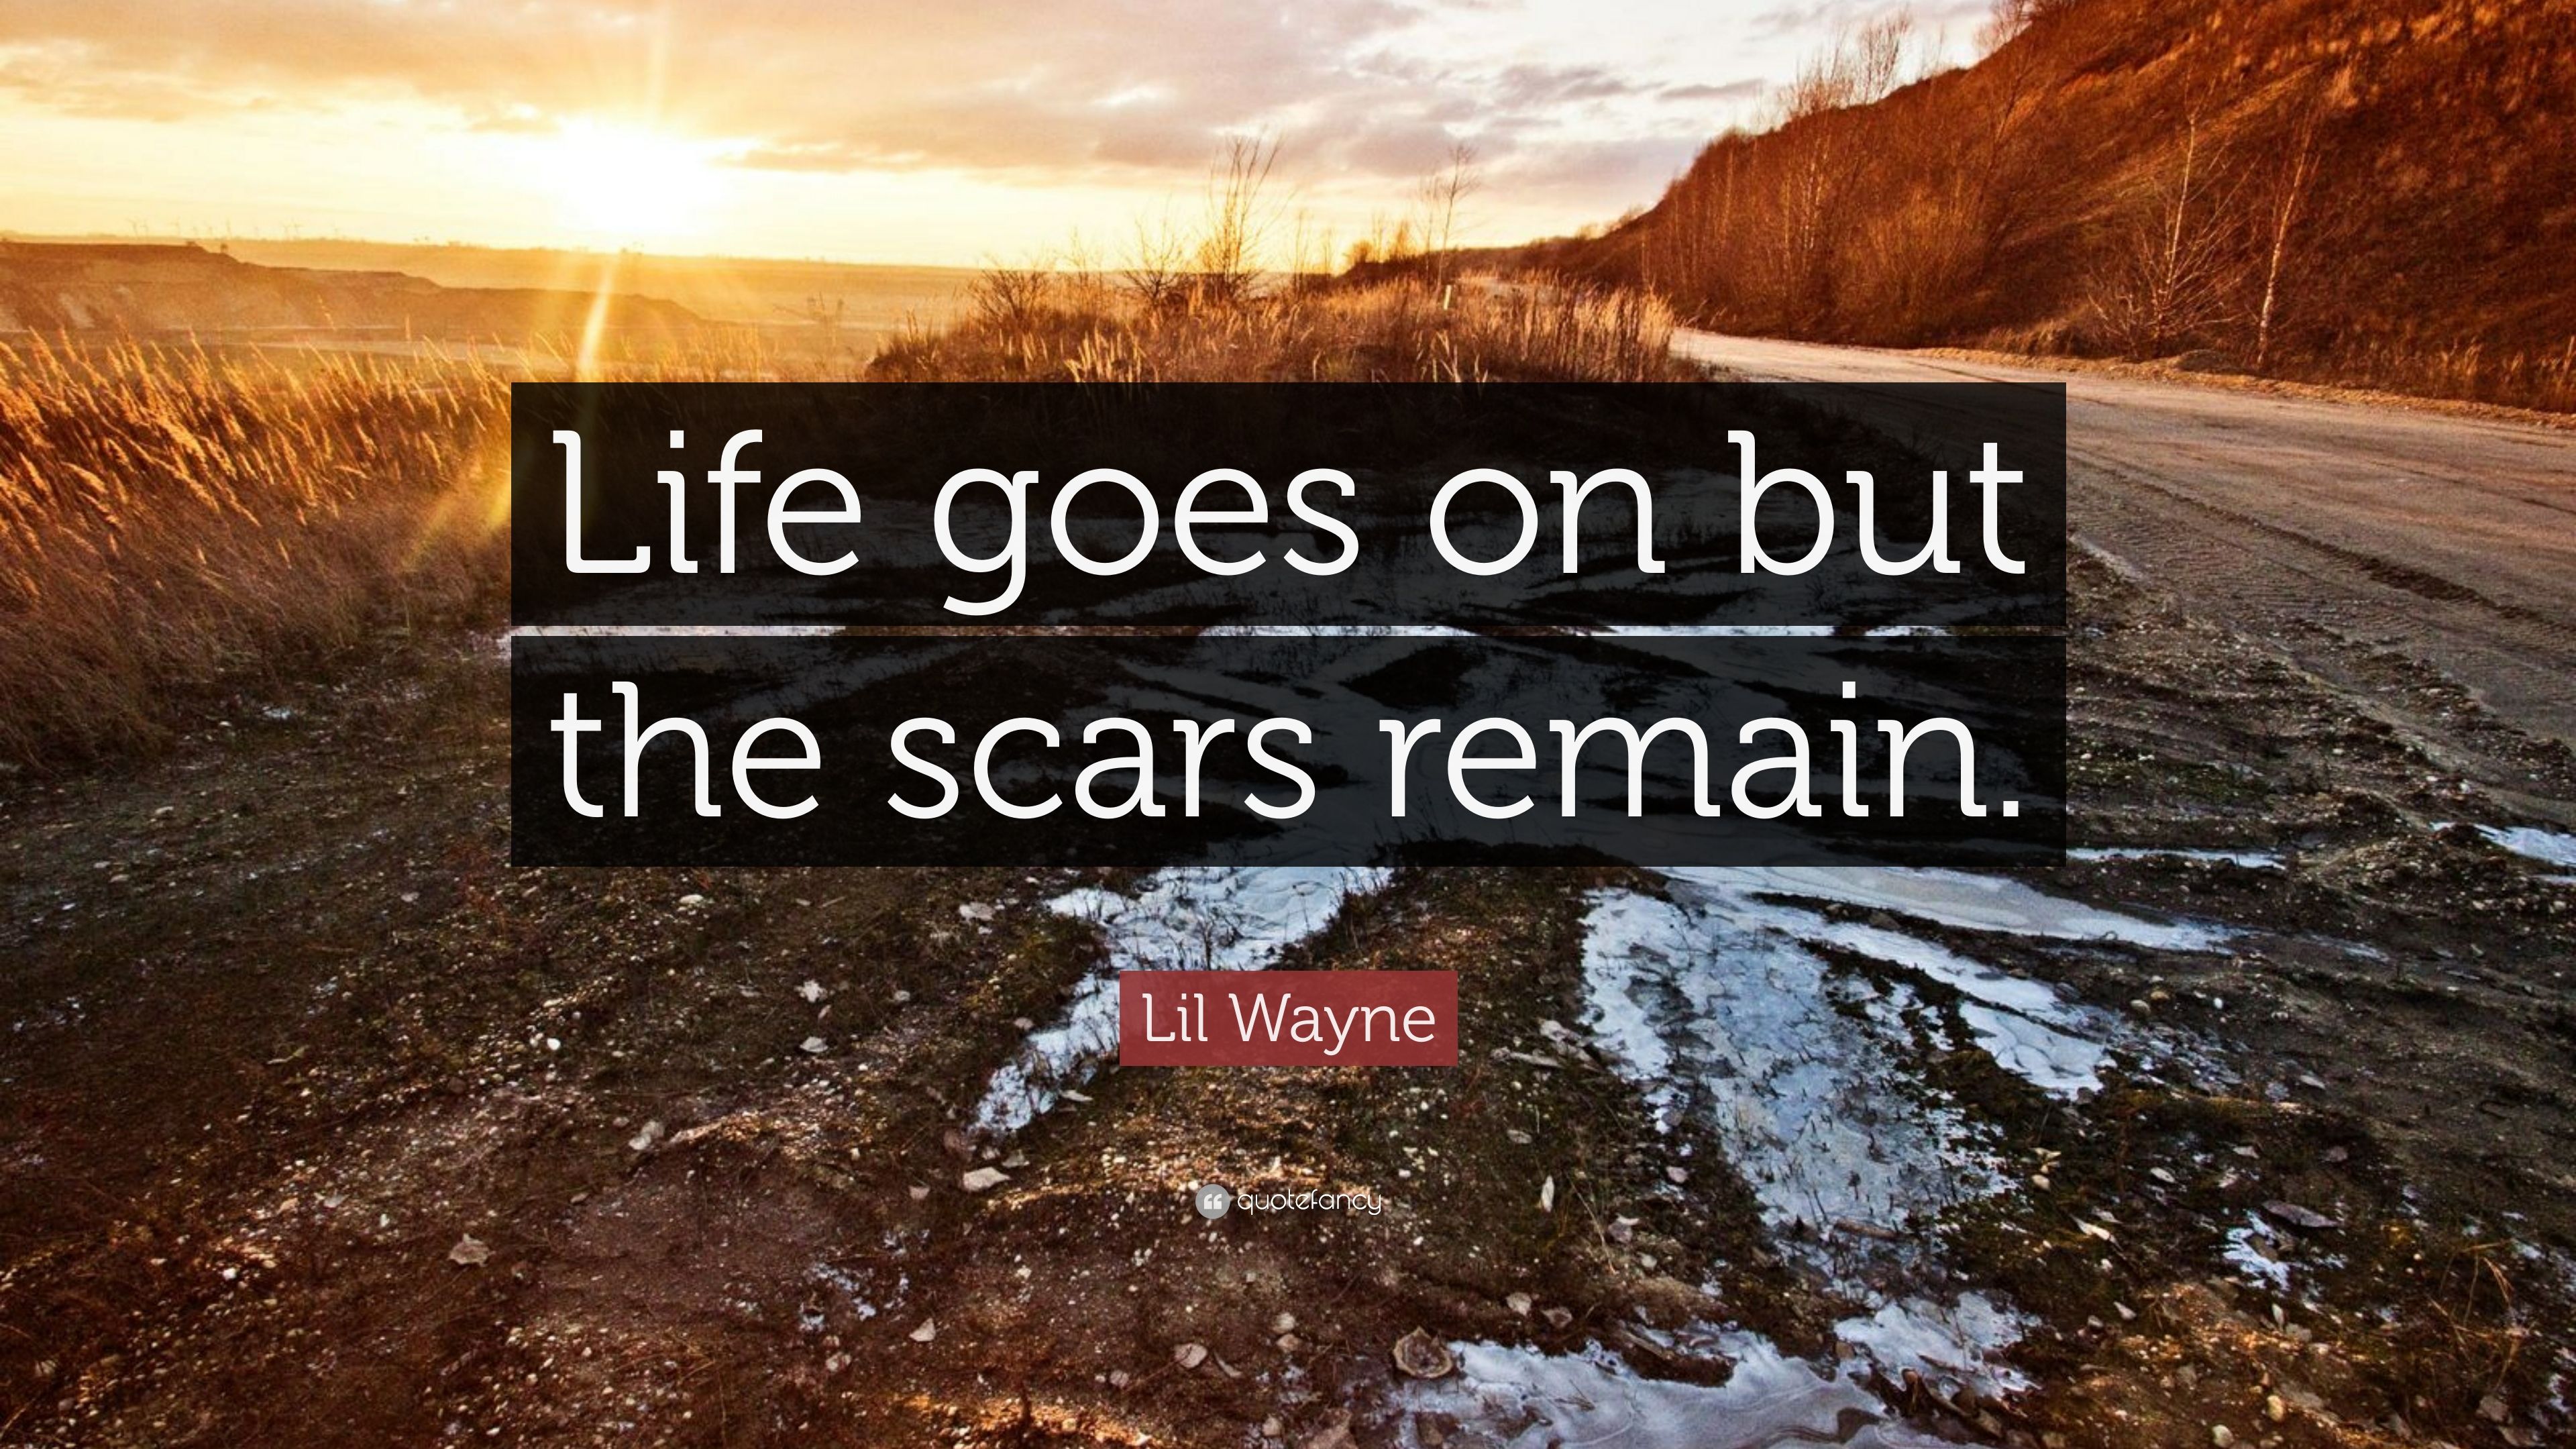 Lil Wayne Quote: “Life goes on but the scars remain.” 12